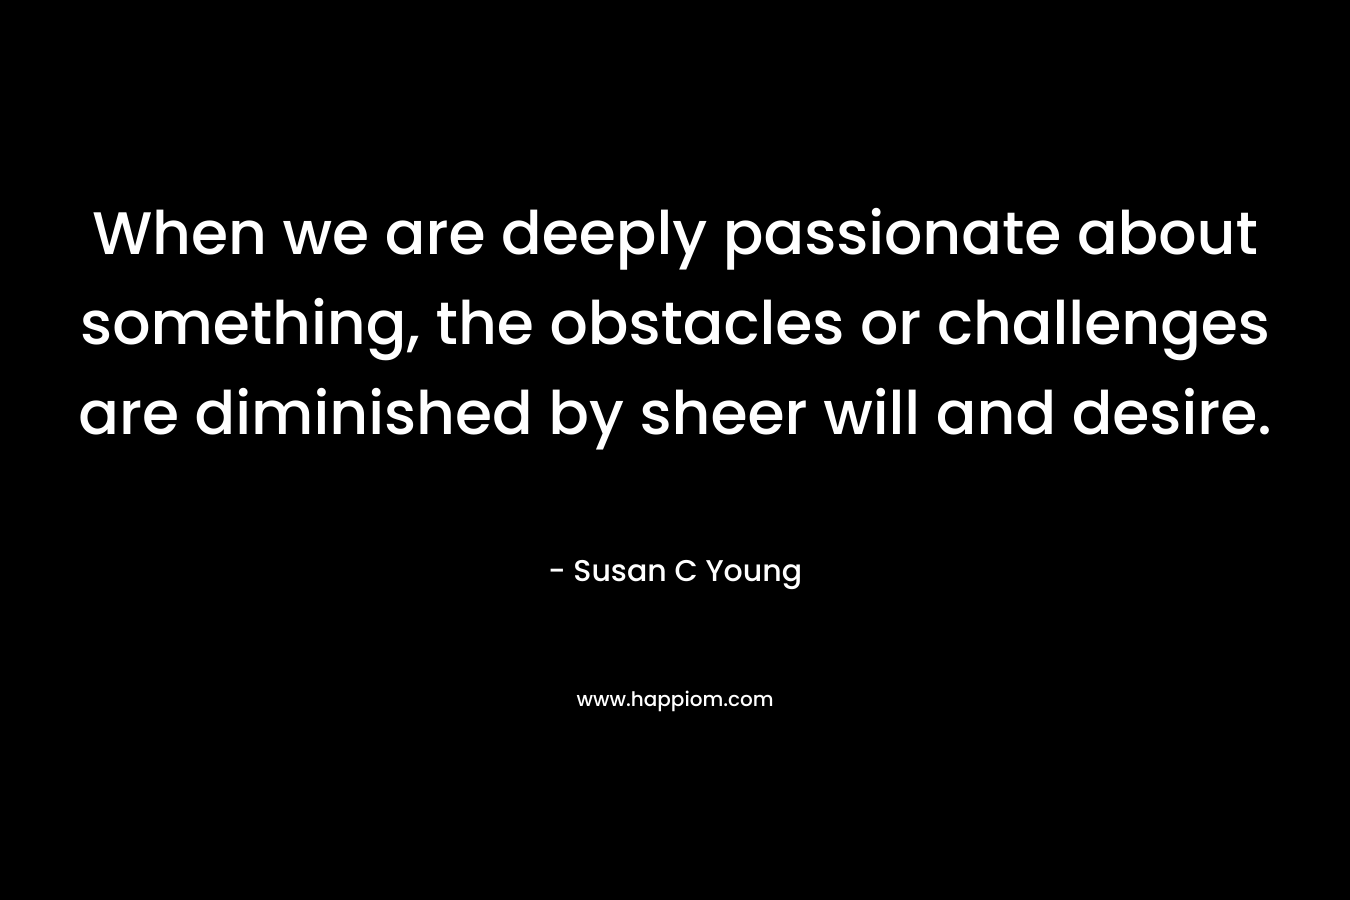 When we are deeply passionate about something, the obstacles or challenges are diminished by sheer will and desire.